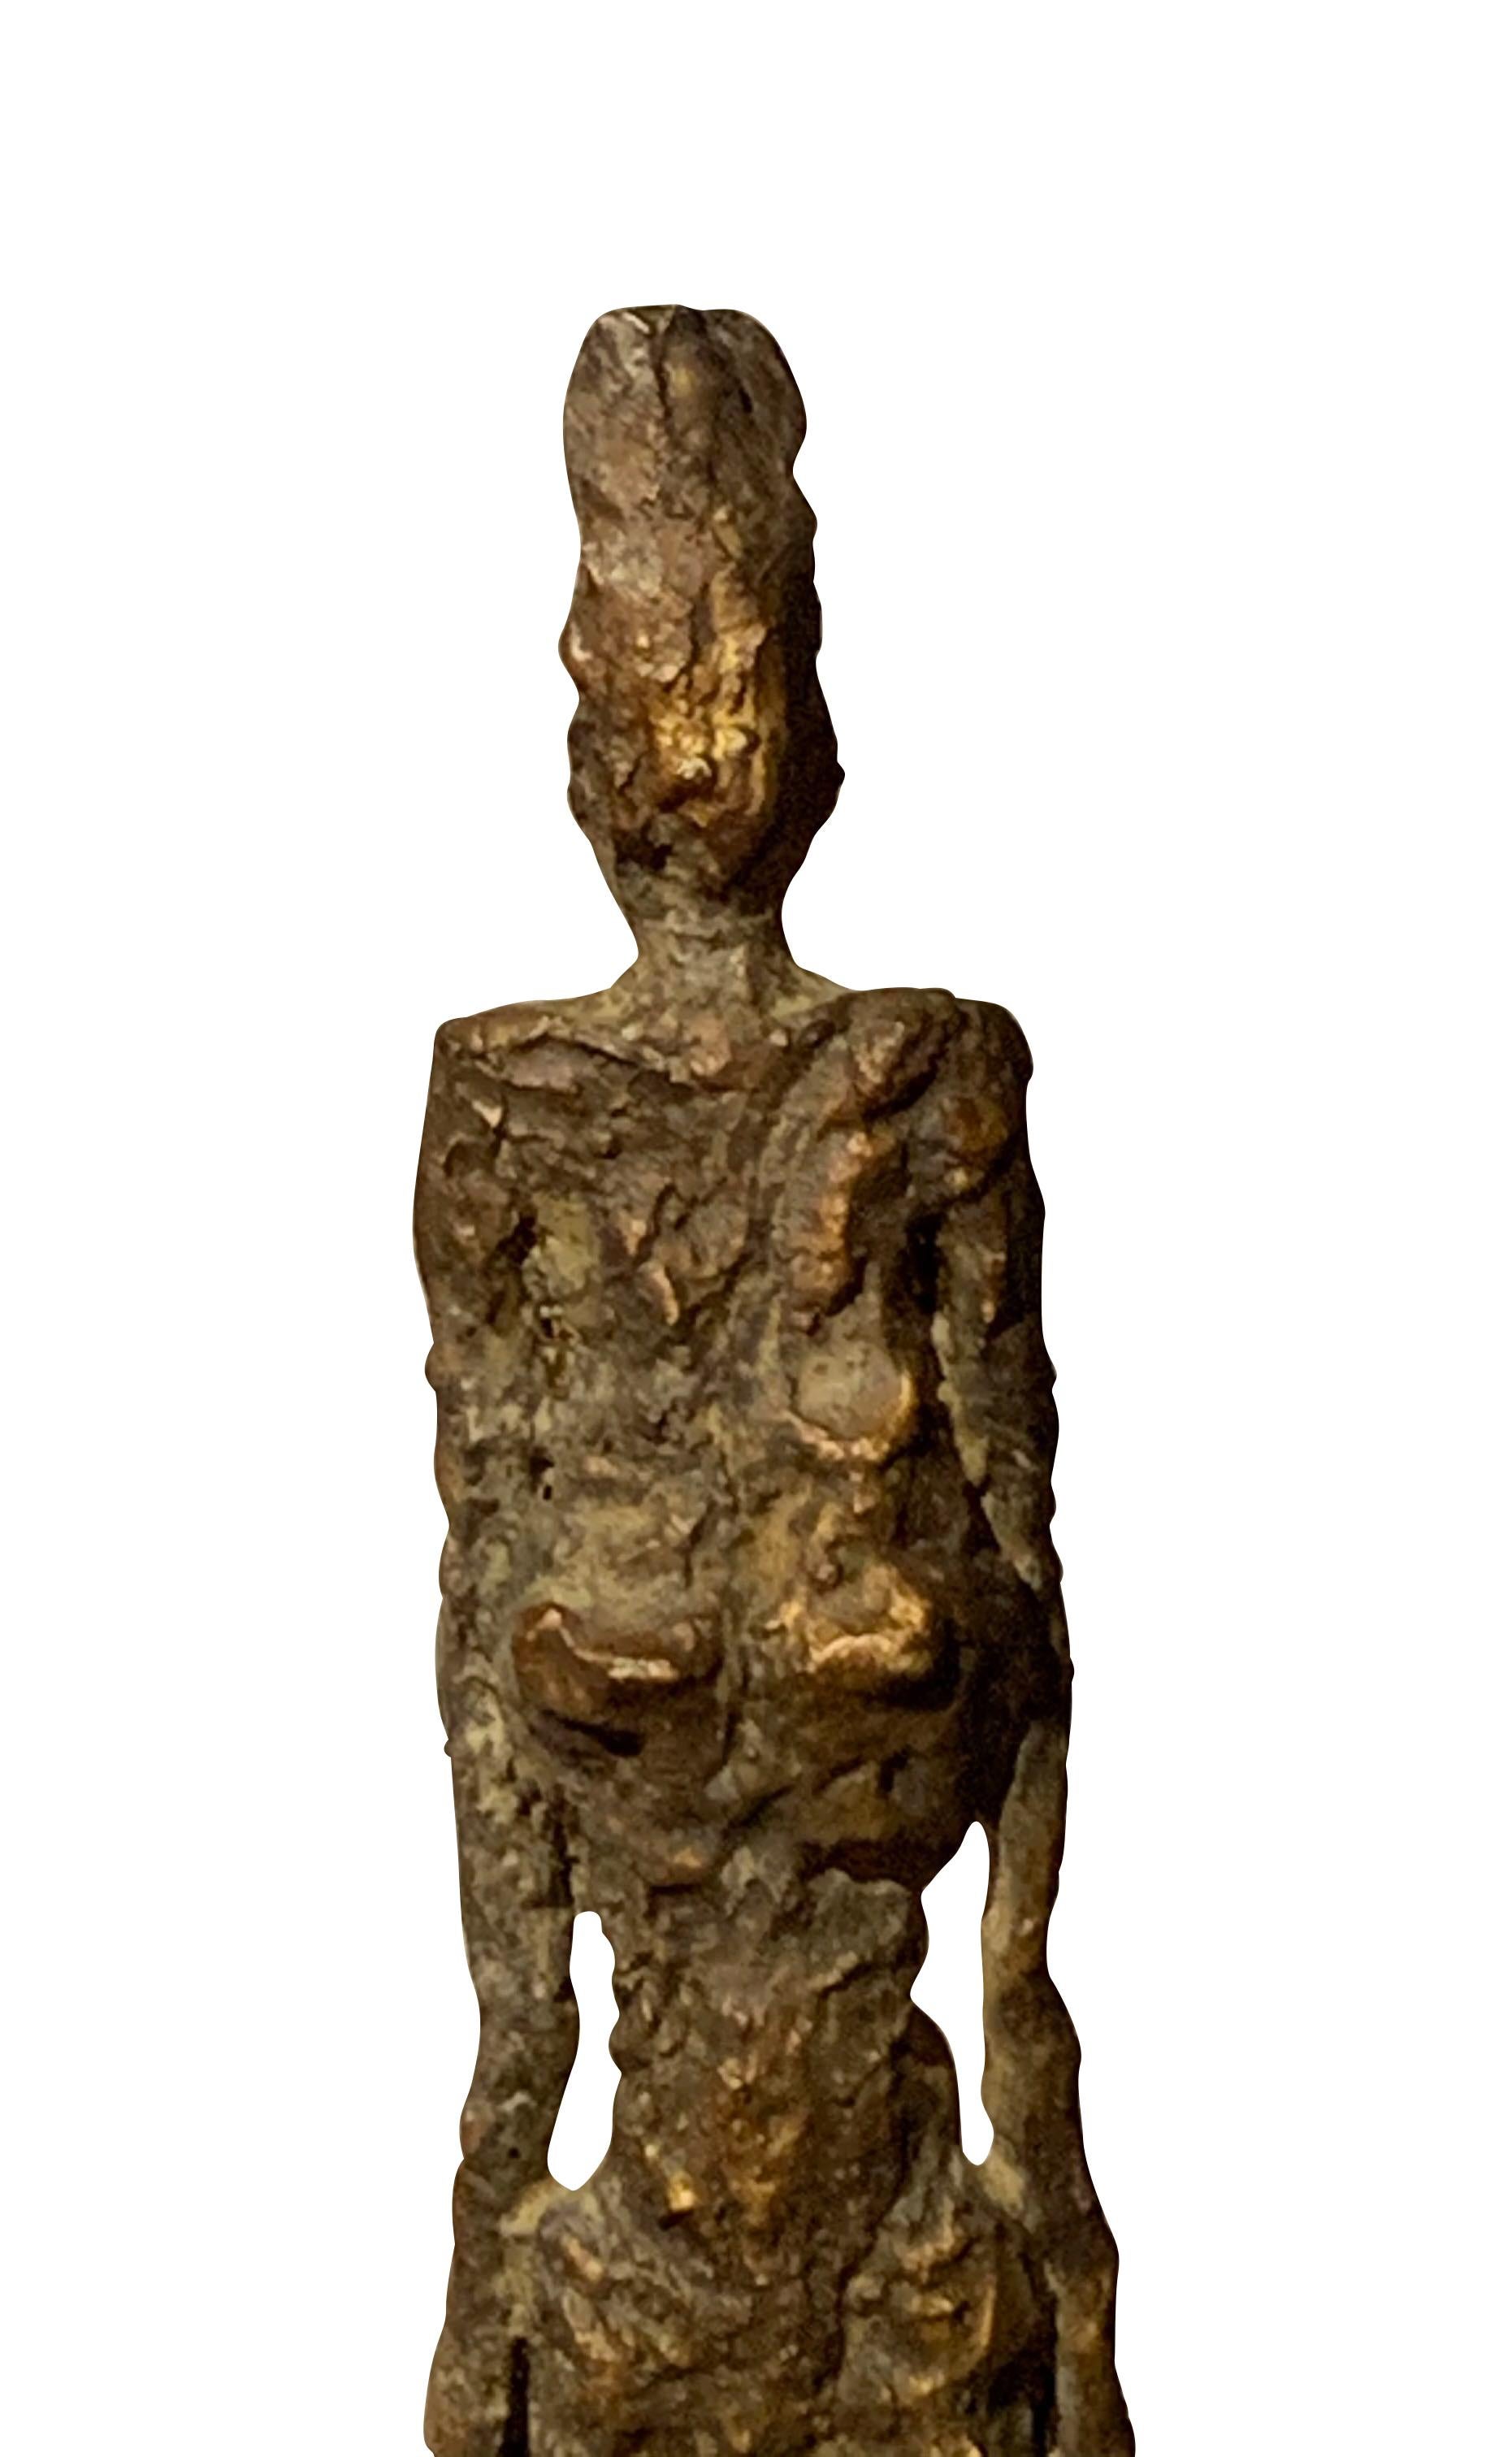 Textured bronze patina sculpture of a standing woman.
She is sculpted in an elongated shape in the style of Giacometti.
The figure stands on a bronze base.
The base measures: 3